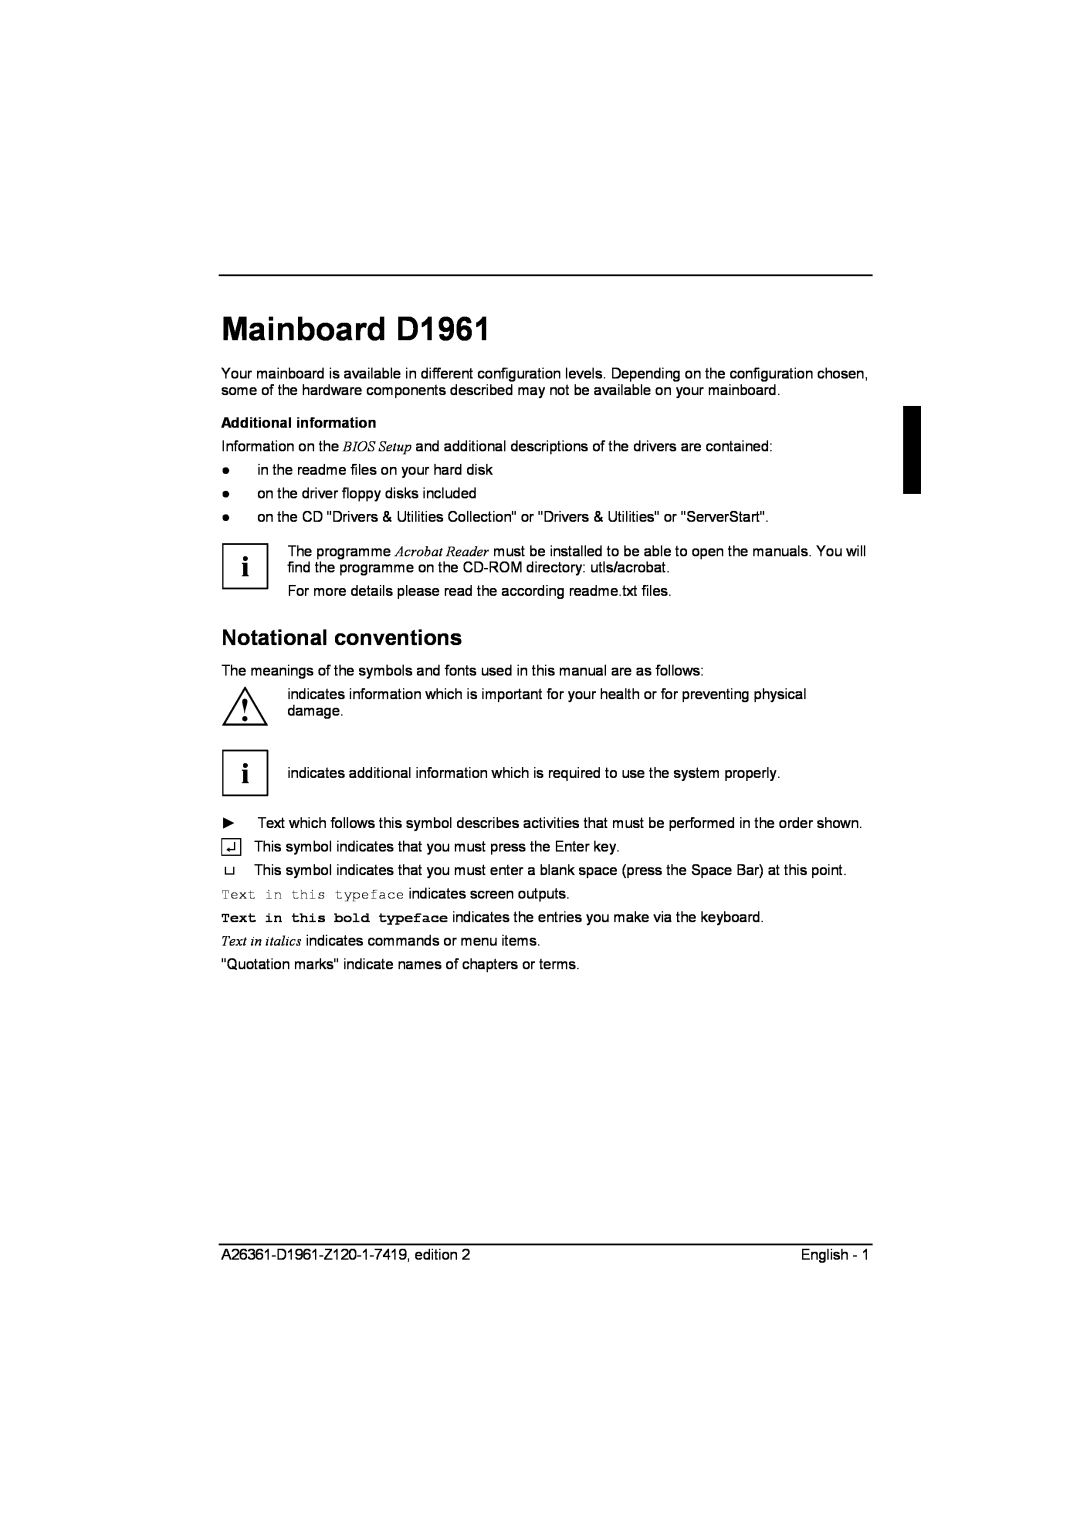 Fujitsu technical manual Notational conventions, Mainboard D1961, Additional information 